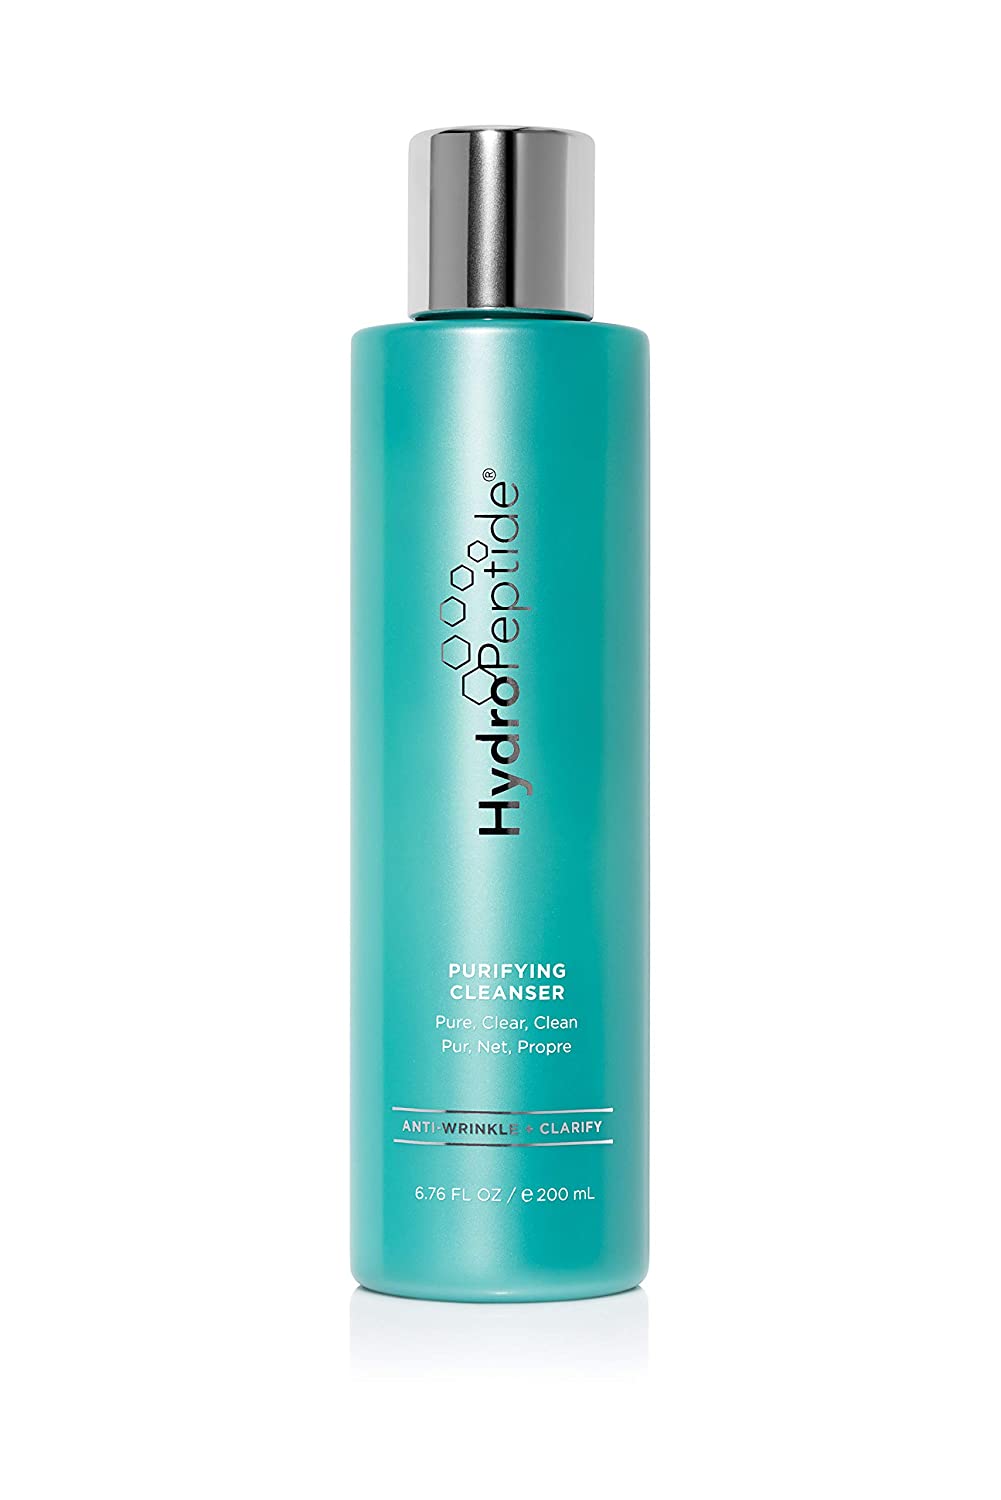 HydroPeptide Purifying Cleanser abcclinc